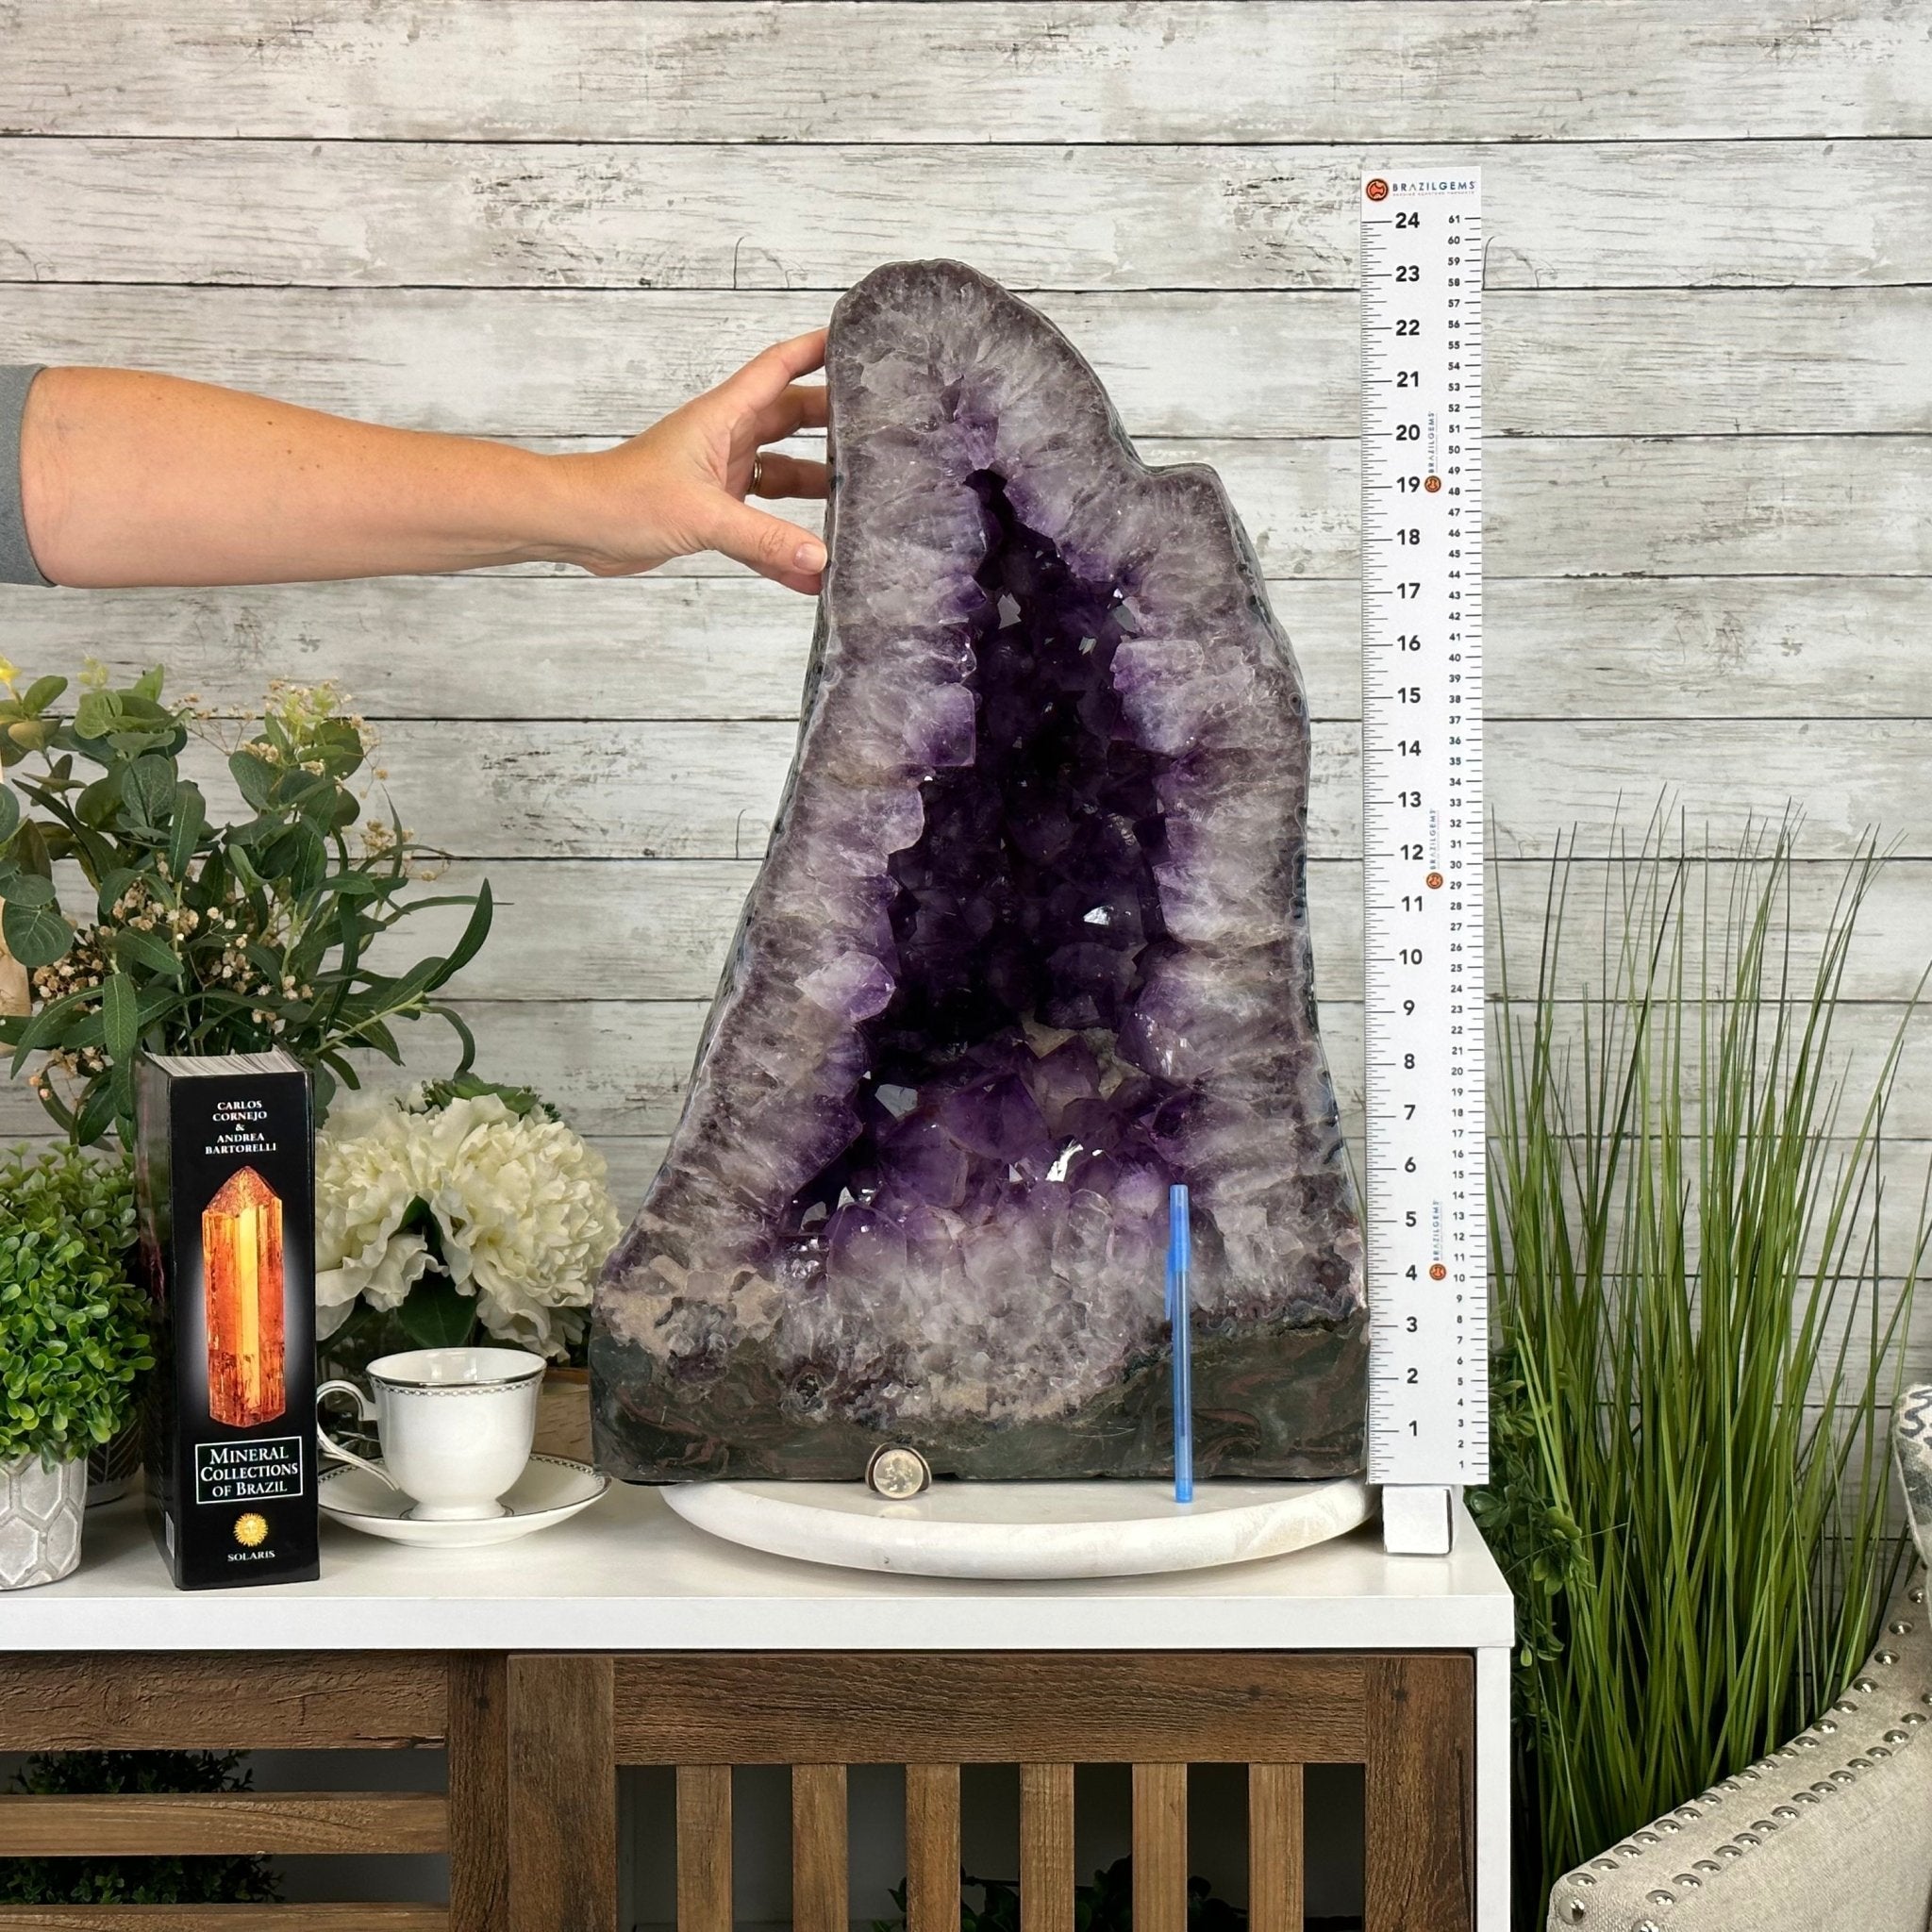 Extra Plus Quality Polished Brazilian Amethyst Cathedral, 114.2 lbs & 23" tall Model #5602-0166 by Brazil Gems - Brazil GemsBrazil GemsExtra Plus Quality Polished Brazilian Amethyst Cathedral, 114.2 lbs & 23" tall Model #5602-0166 by Brazil GemsPolished Cathedrals5602-0166